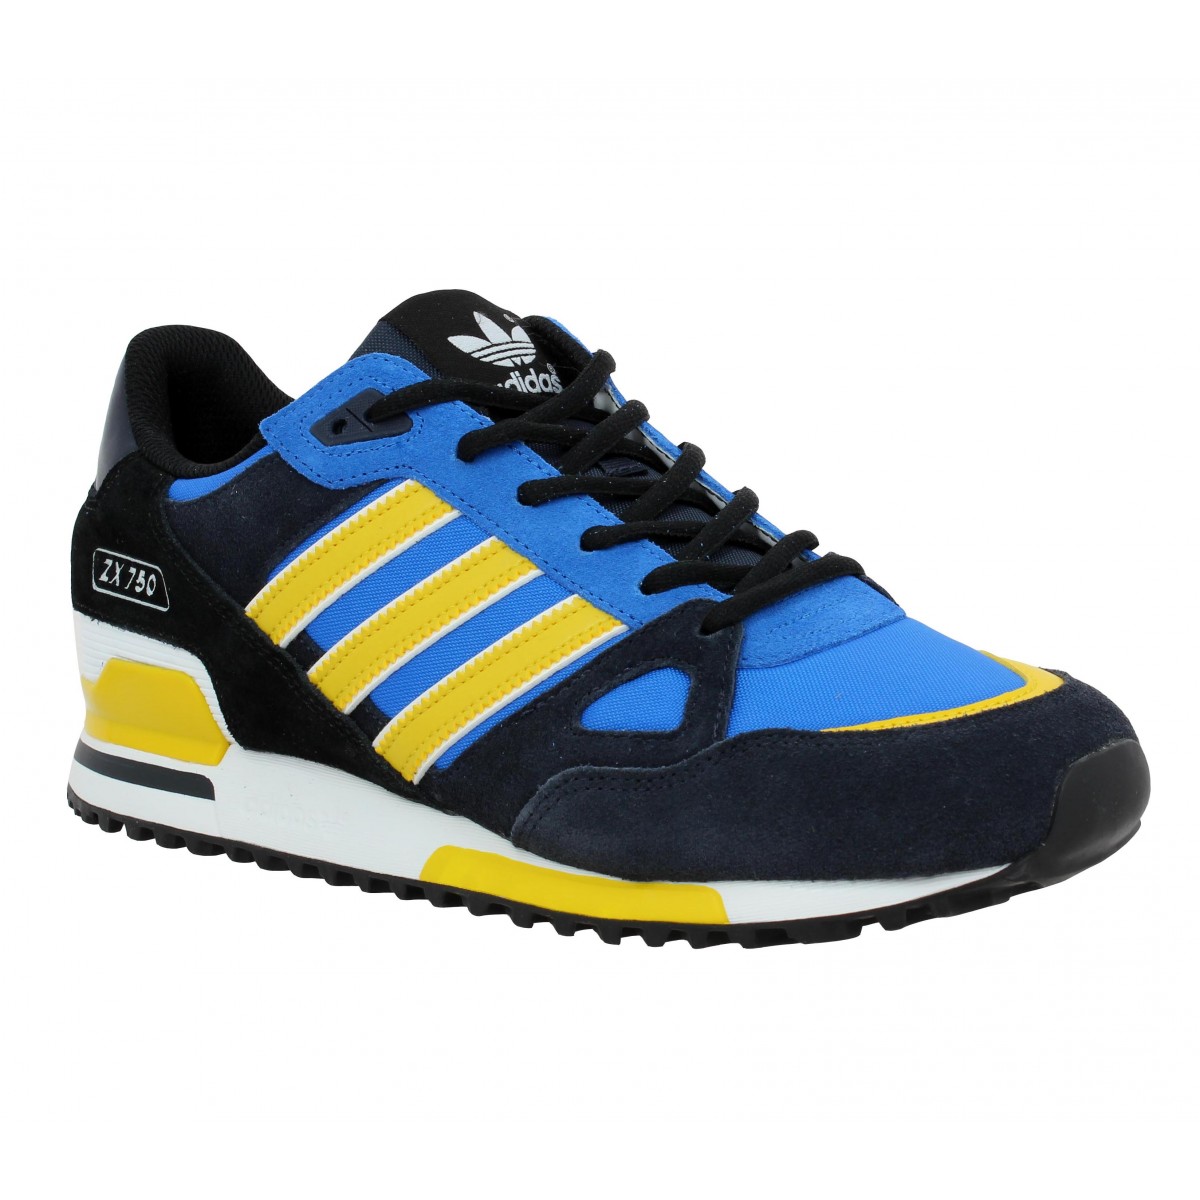 adidas zx 750 homme 2014